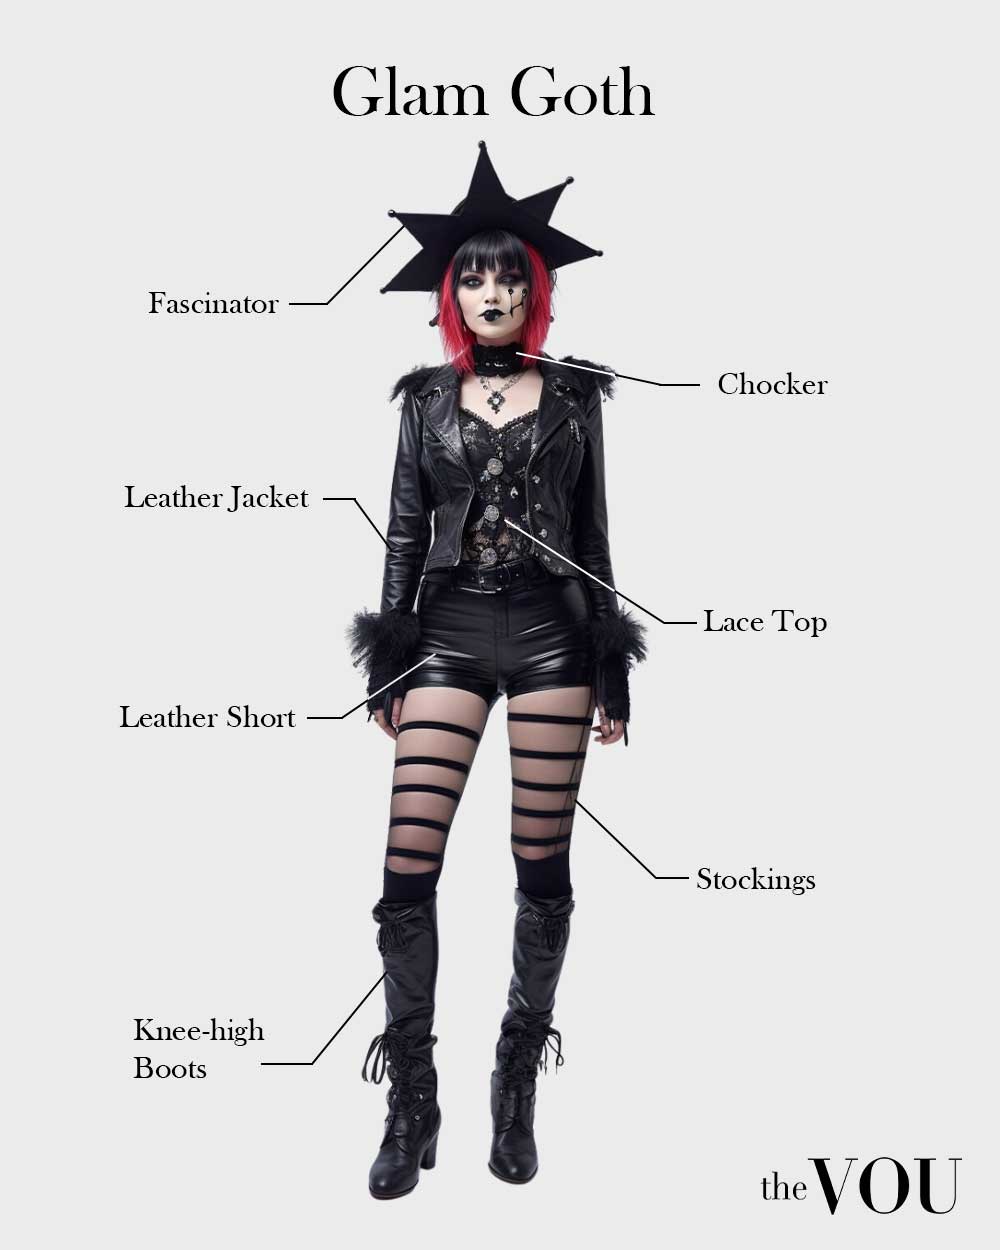 glam goth outfit elements